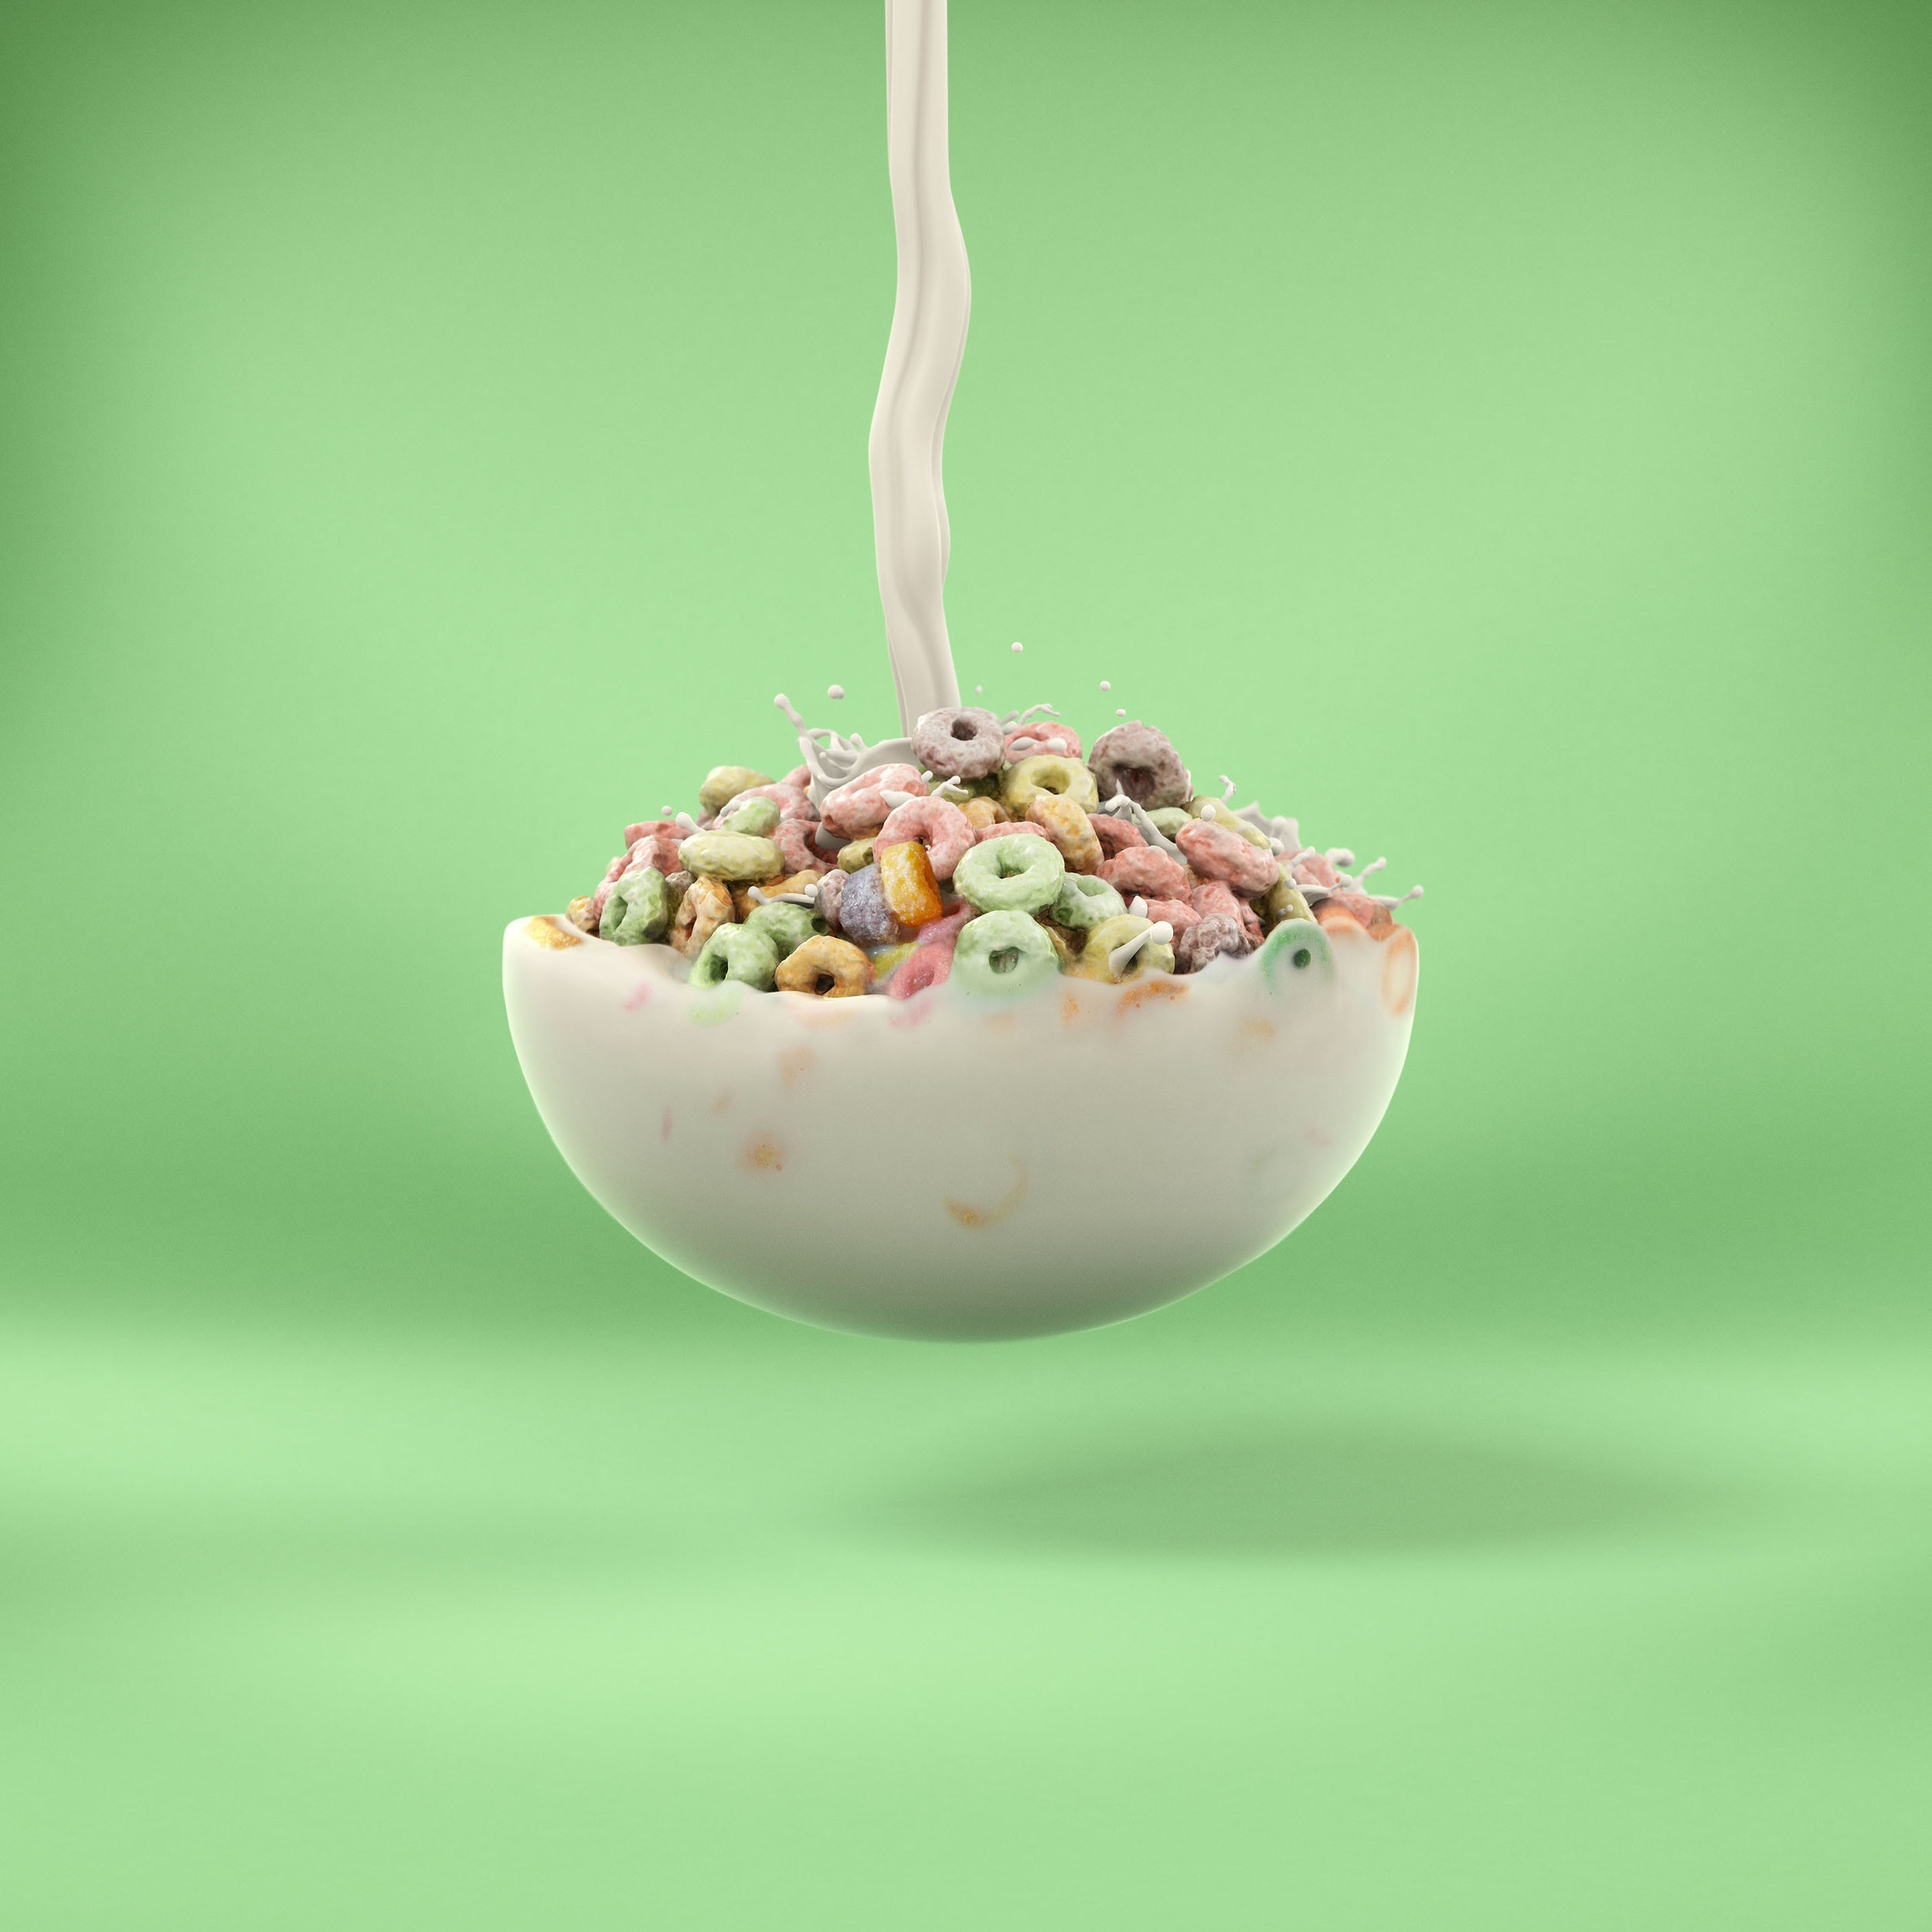  Cereal without the bowl  CGI exploration 